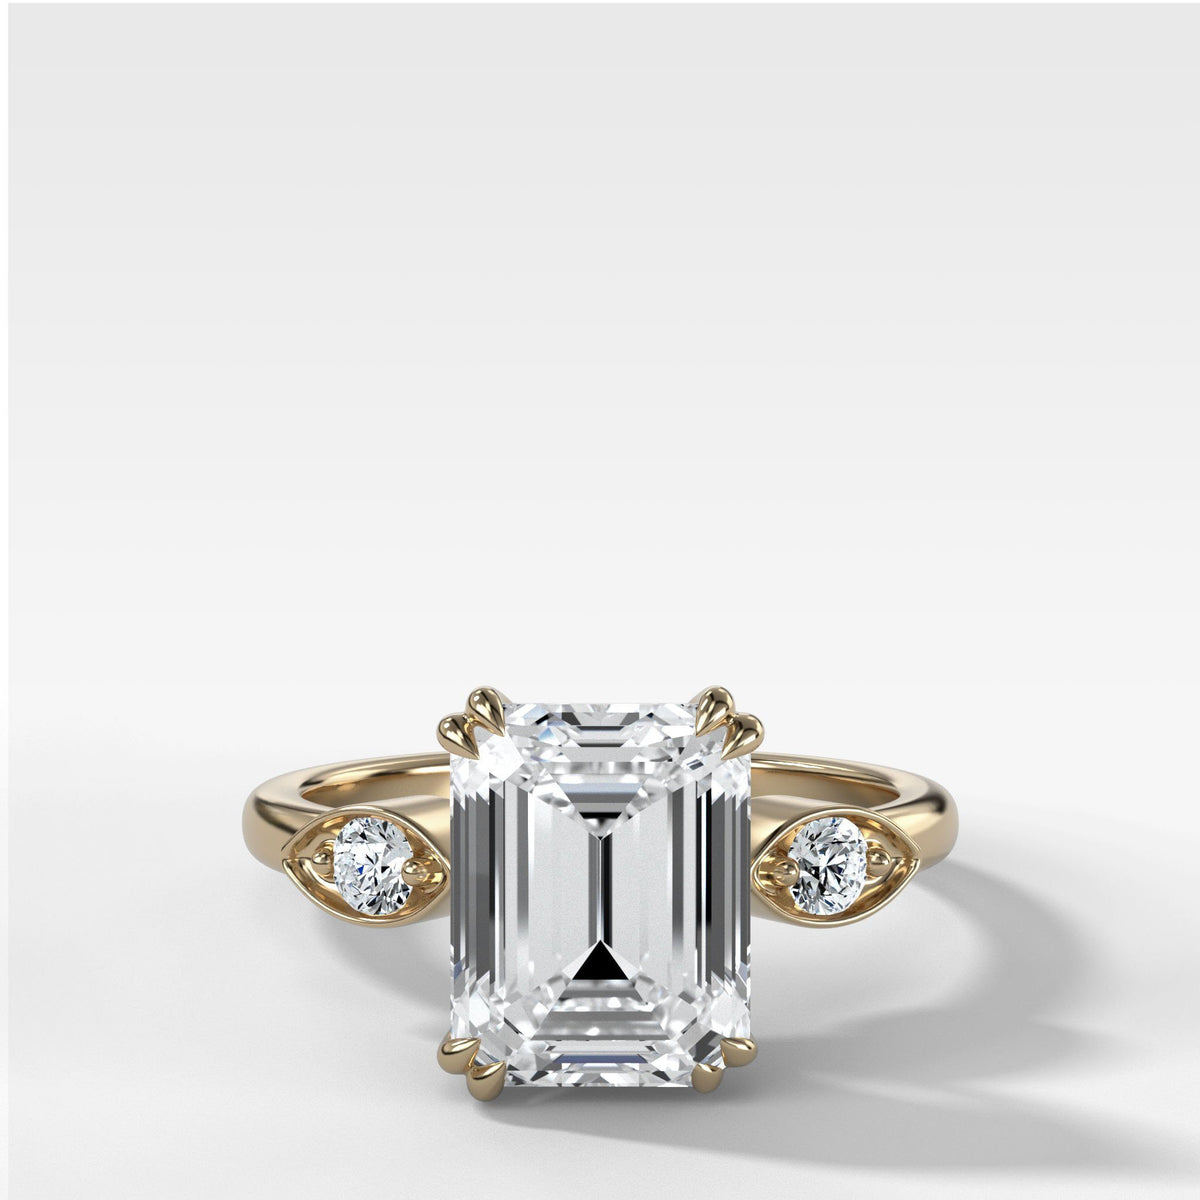 Vintage Ridge Shank Diamond Engagement Ring With Emerald Cut by Good Stone in Yellow Gold